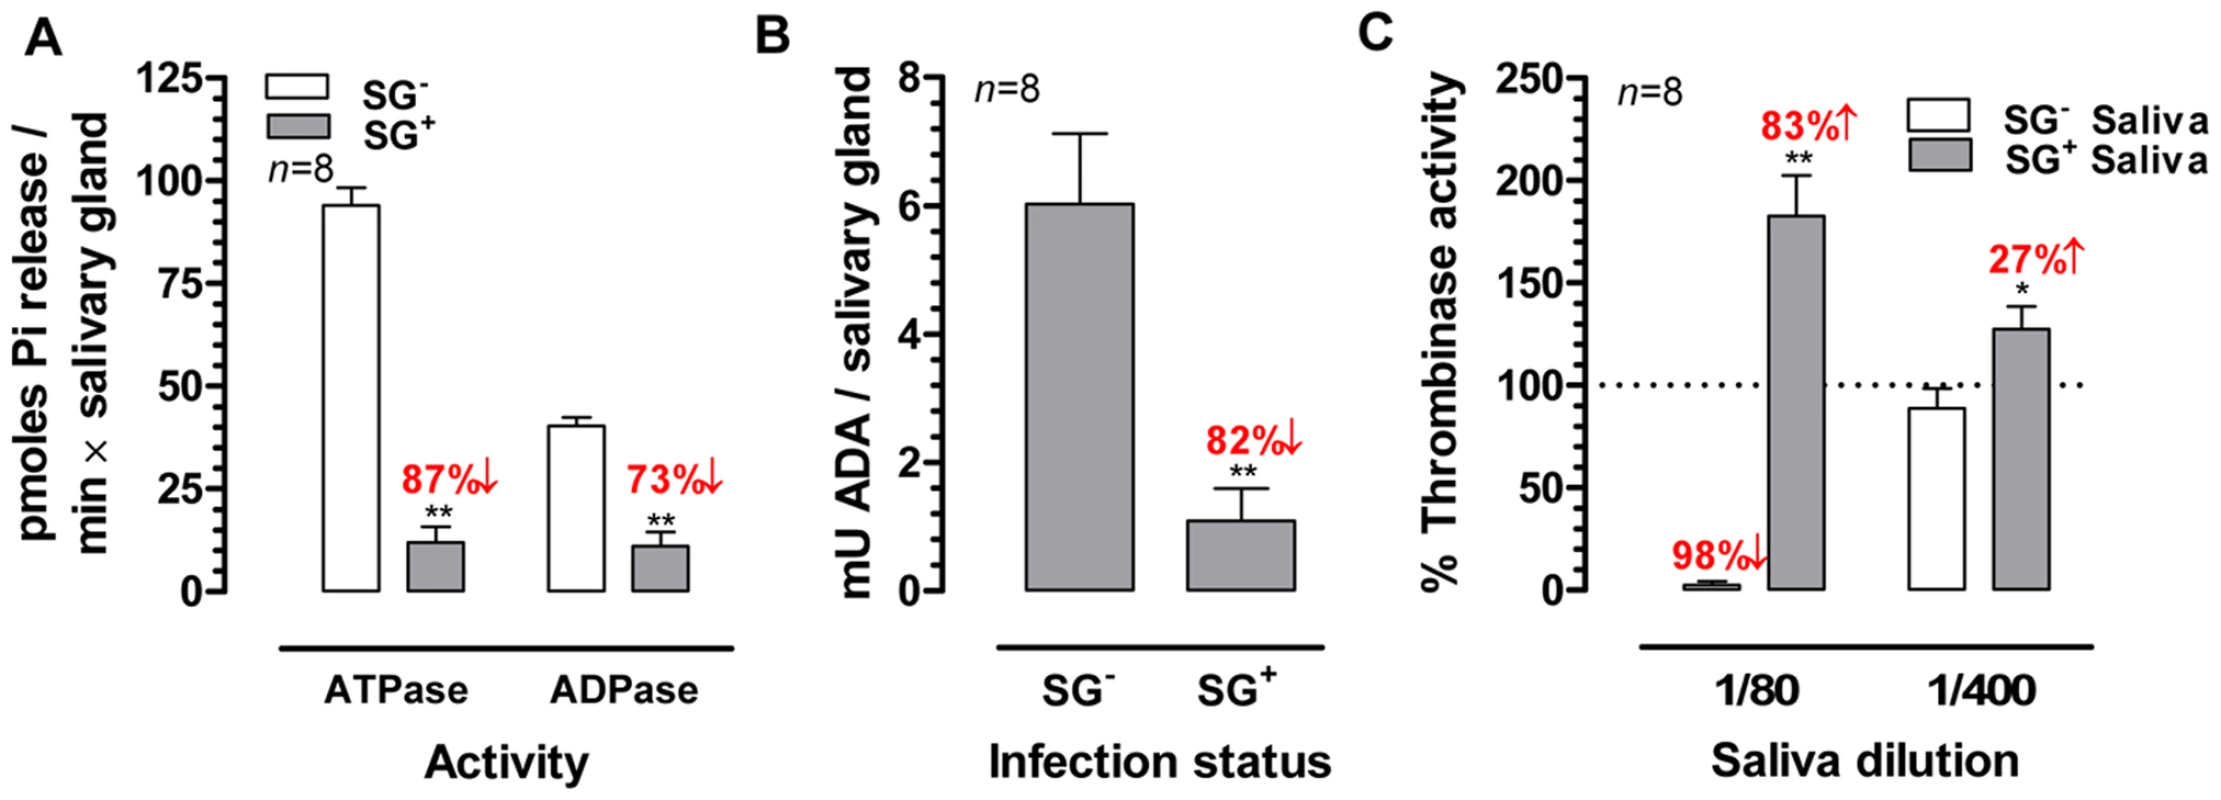 Effects of the <i>T. brucei</i> salivary gland infection on the biological activities of tsetse fly saliva.